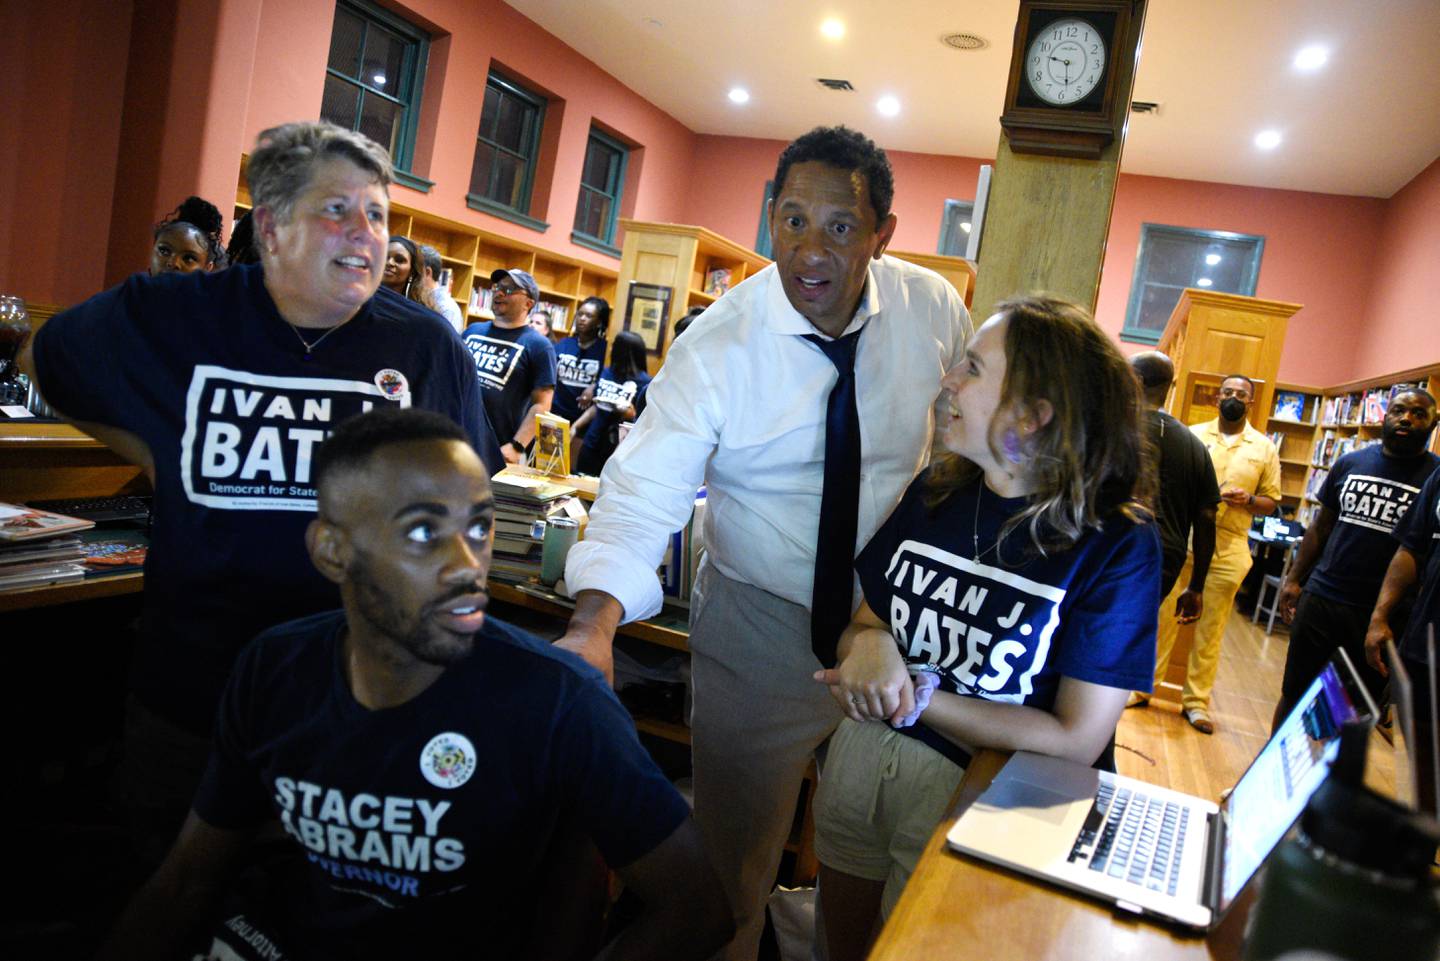 Baltimore City State's Attorney candidate Ivan Bates (center) watches results come in with Rachel Rice (left), Marvin James and Adelaide Sudbrink at Bates' election night event Tuesday night. Maryland held its primary election on Tuesday, July 19.